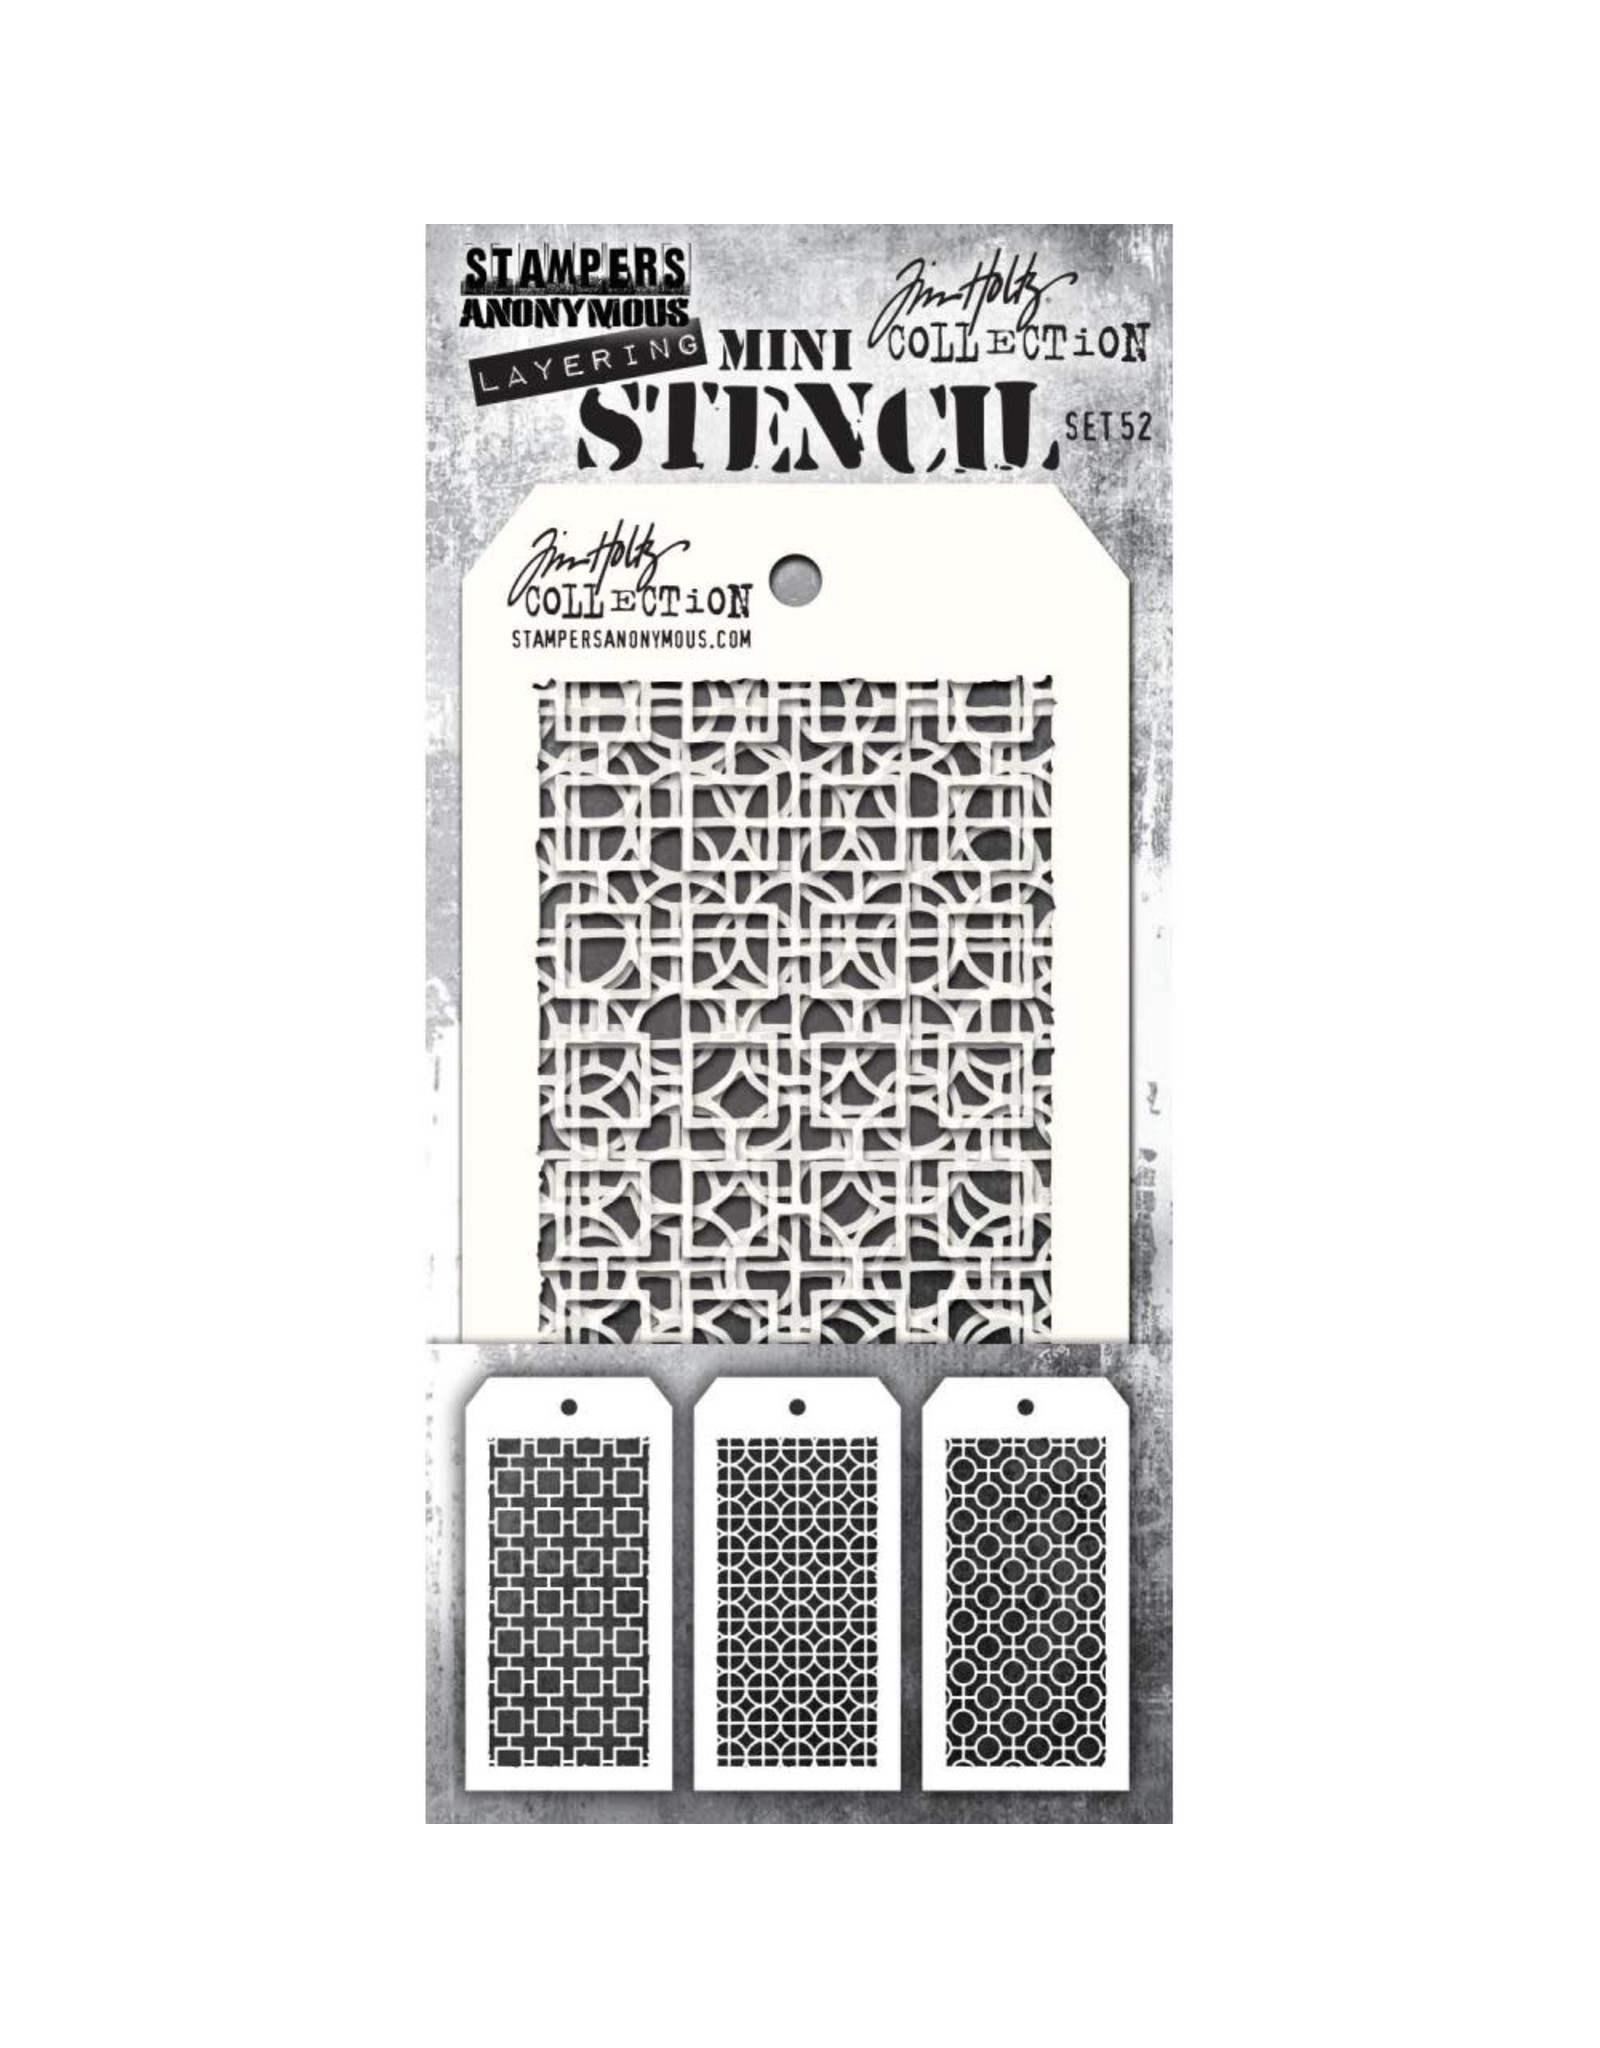 Tim Holtz - Stampers Anonymous MINI STENCIL SET #52